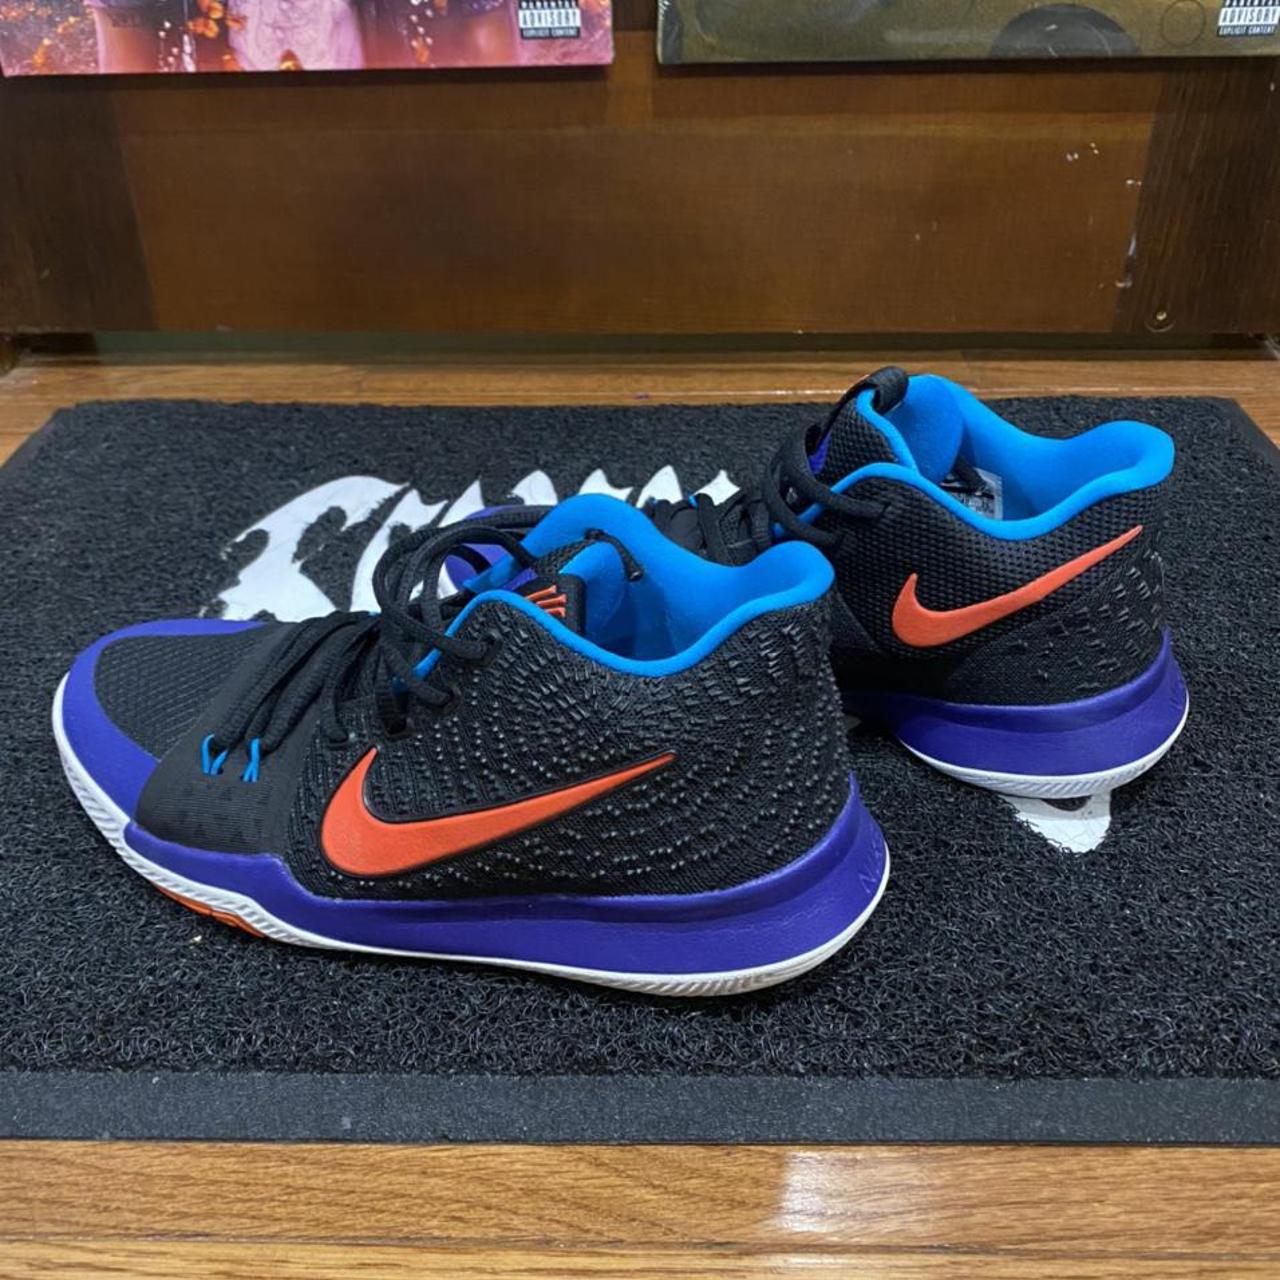 Nike Men's Black and Purple Trainers (2)